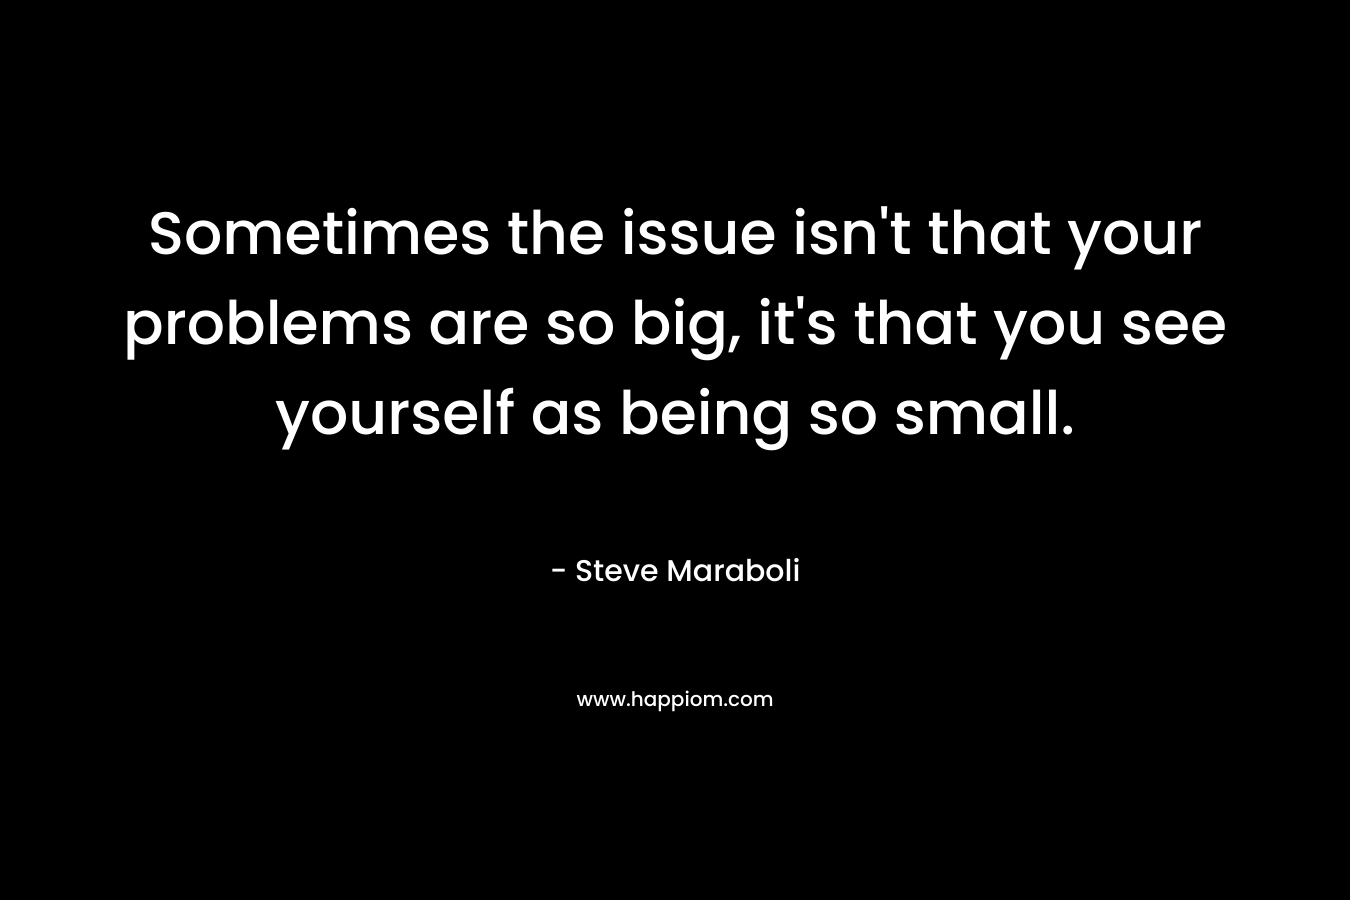 Sometimes the issue isn't that your problems are so big, it's that you see yourself as being so small.